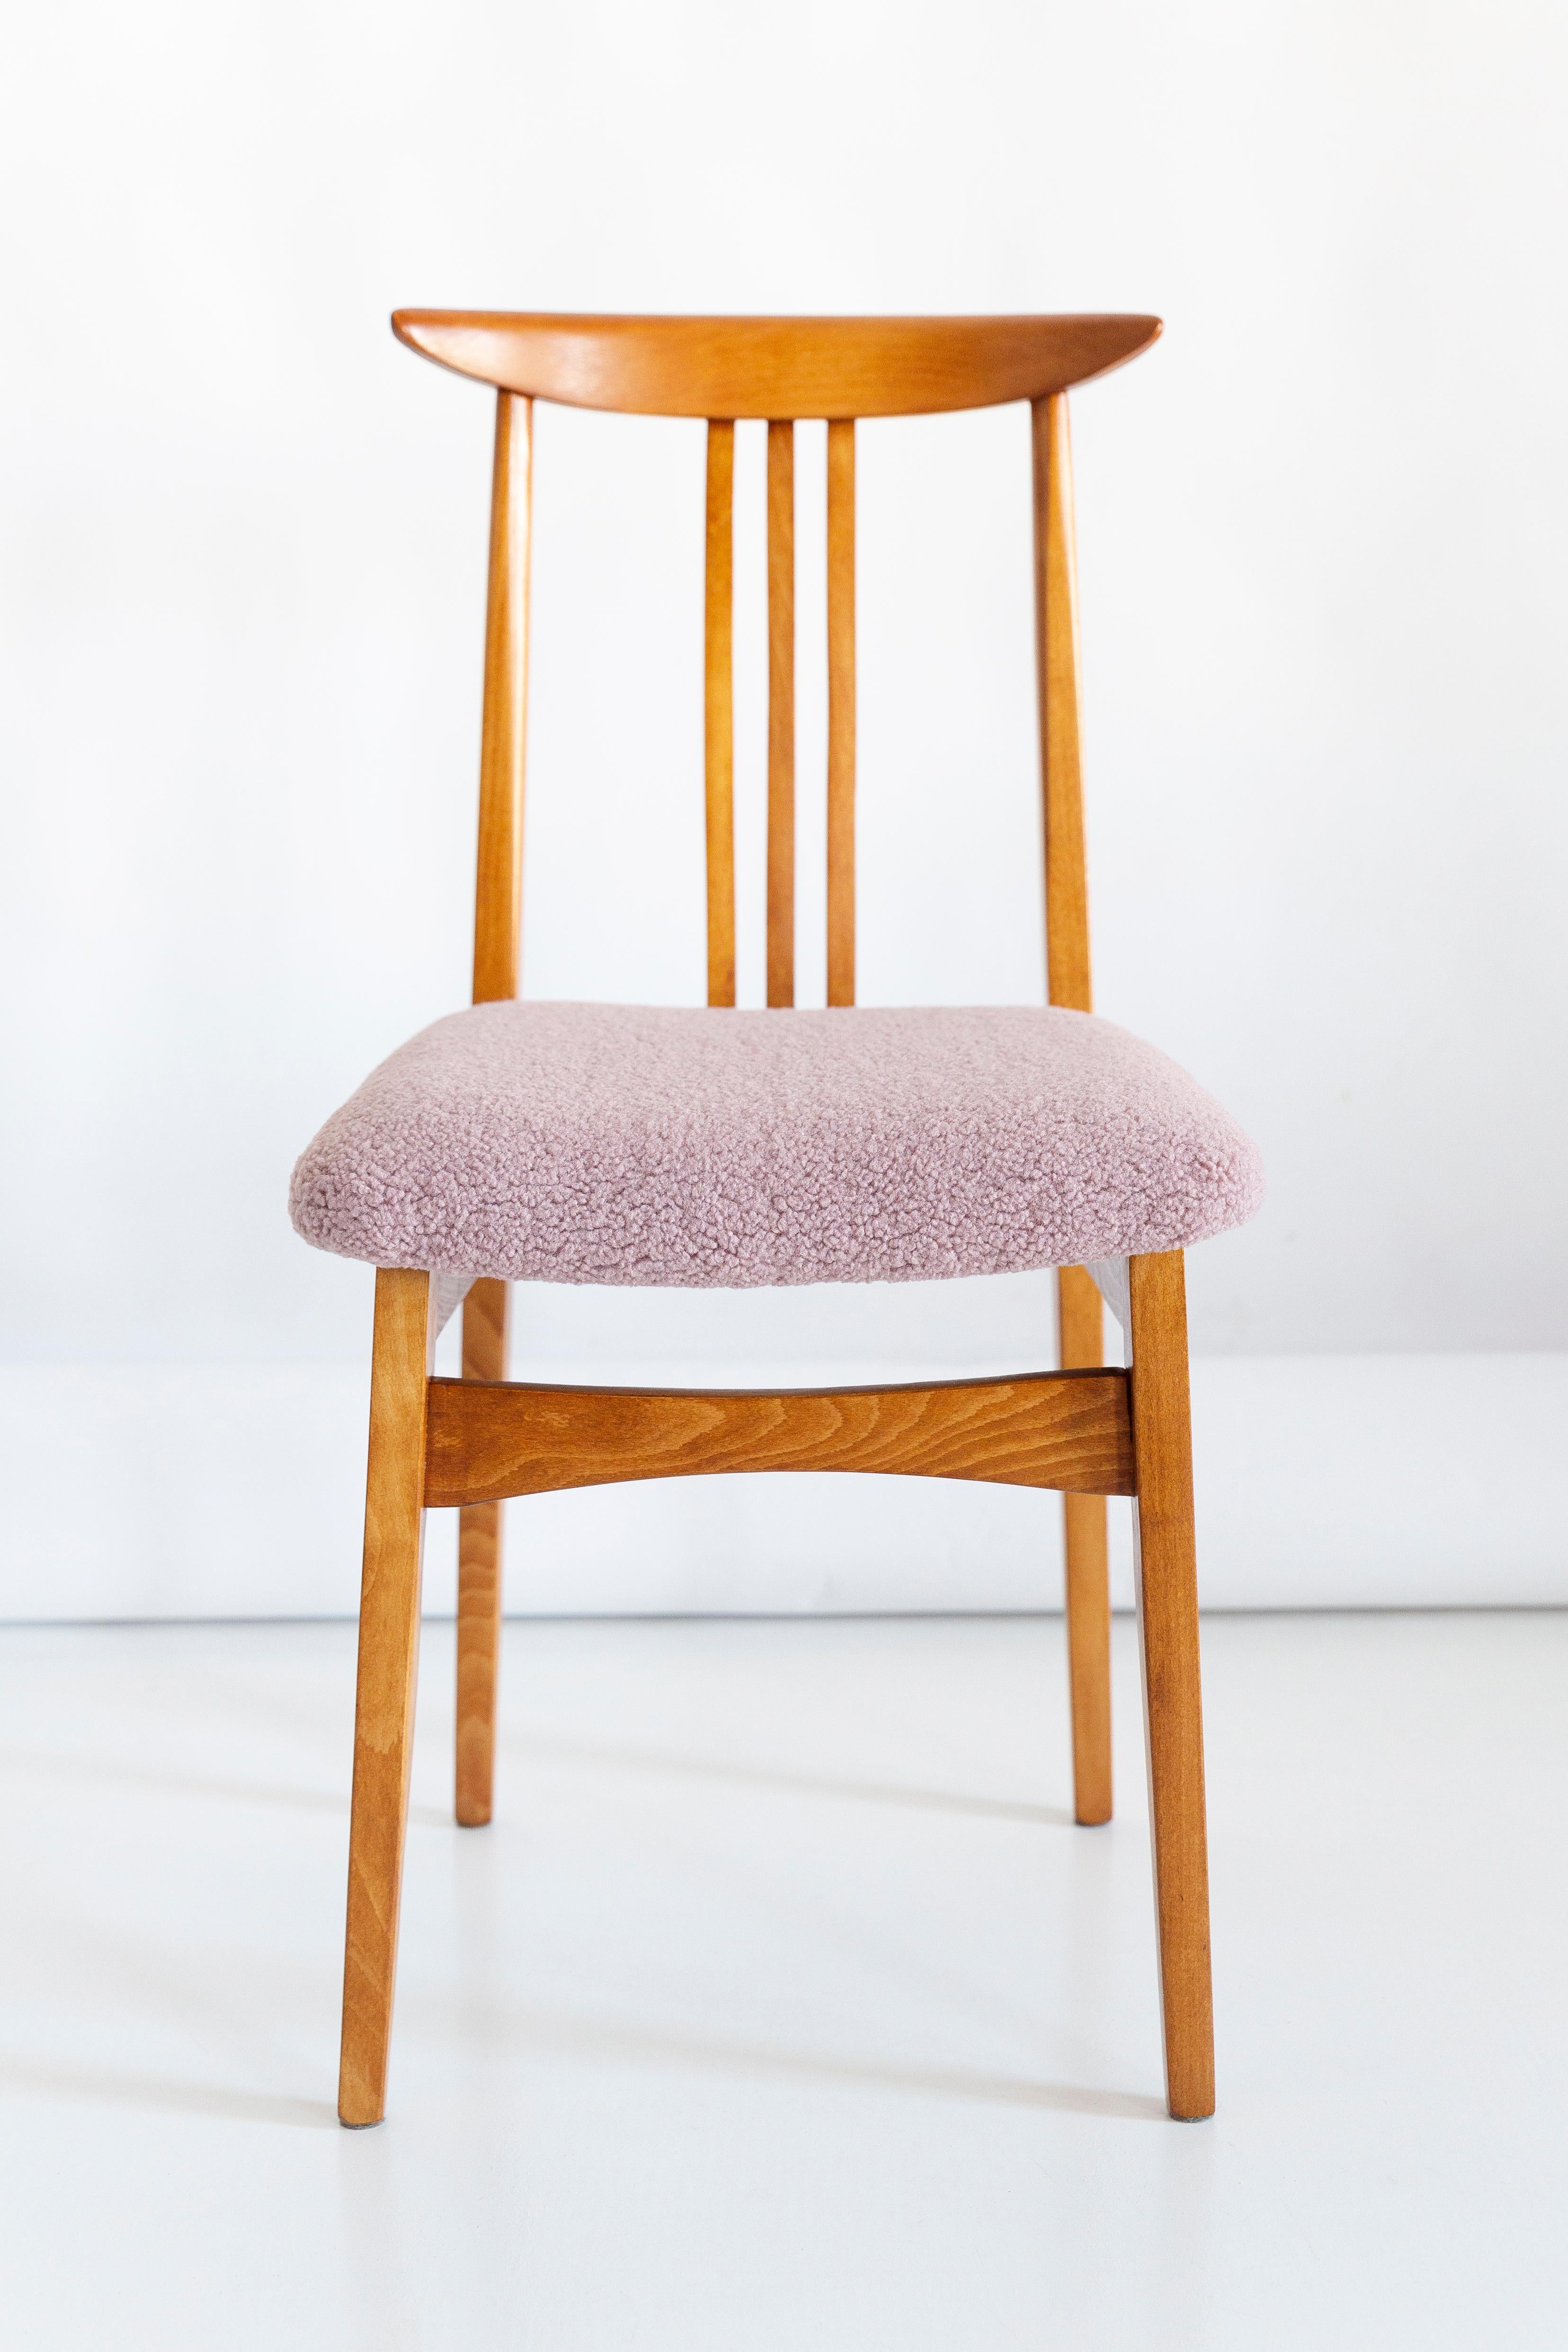 Set of Six Mid-Century Pink Boucle Chairs, by Zielinski, Poland, 1960s For Sale 3